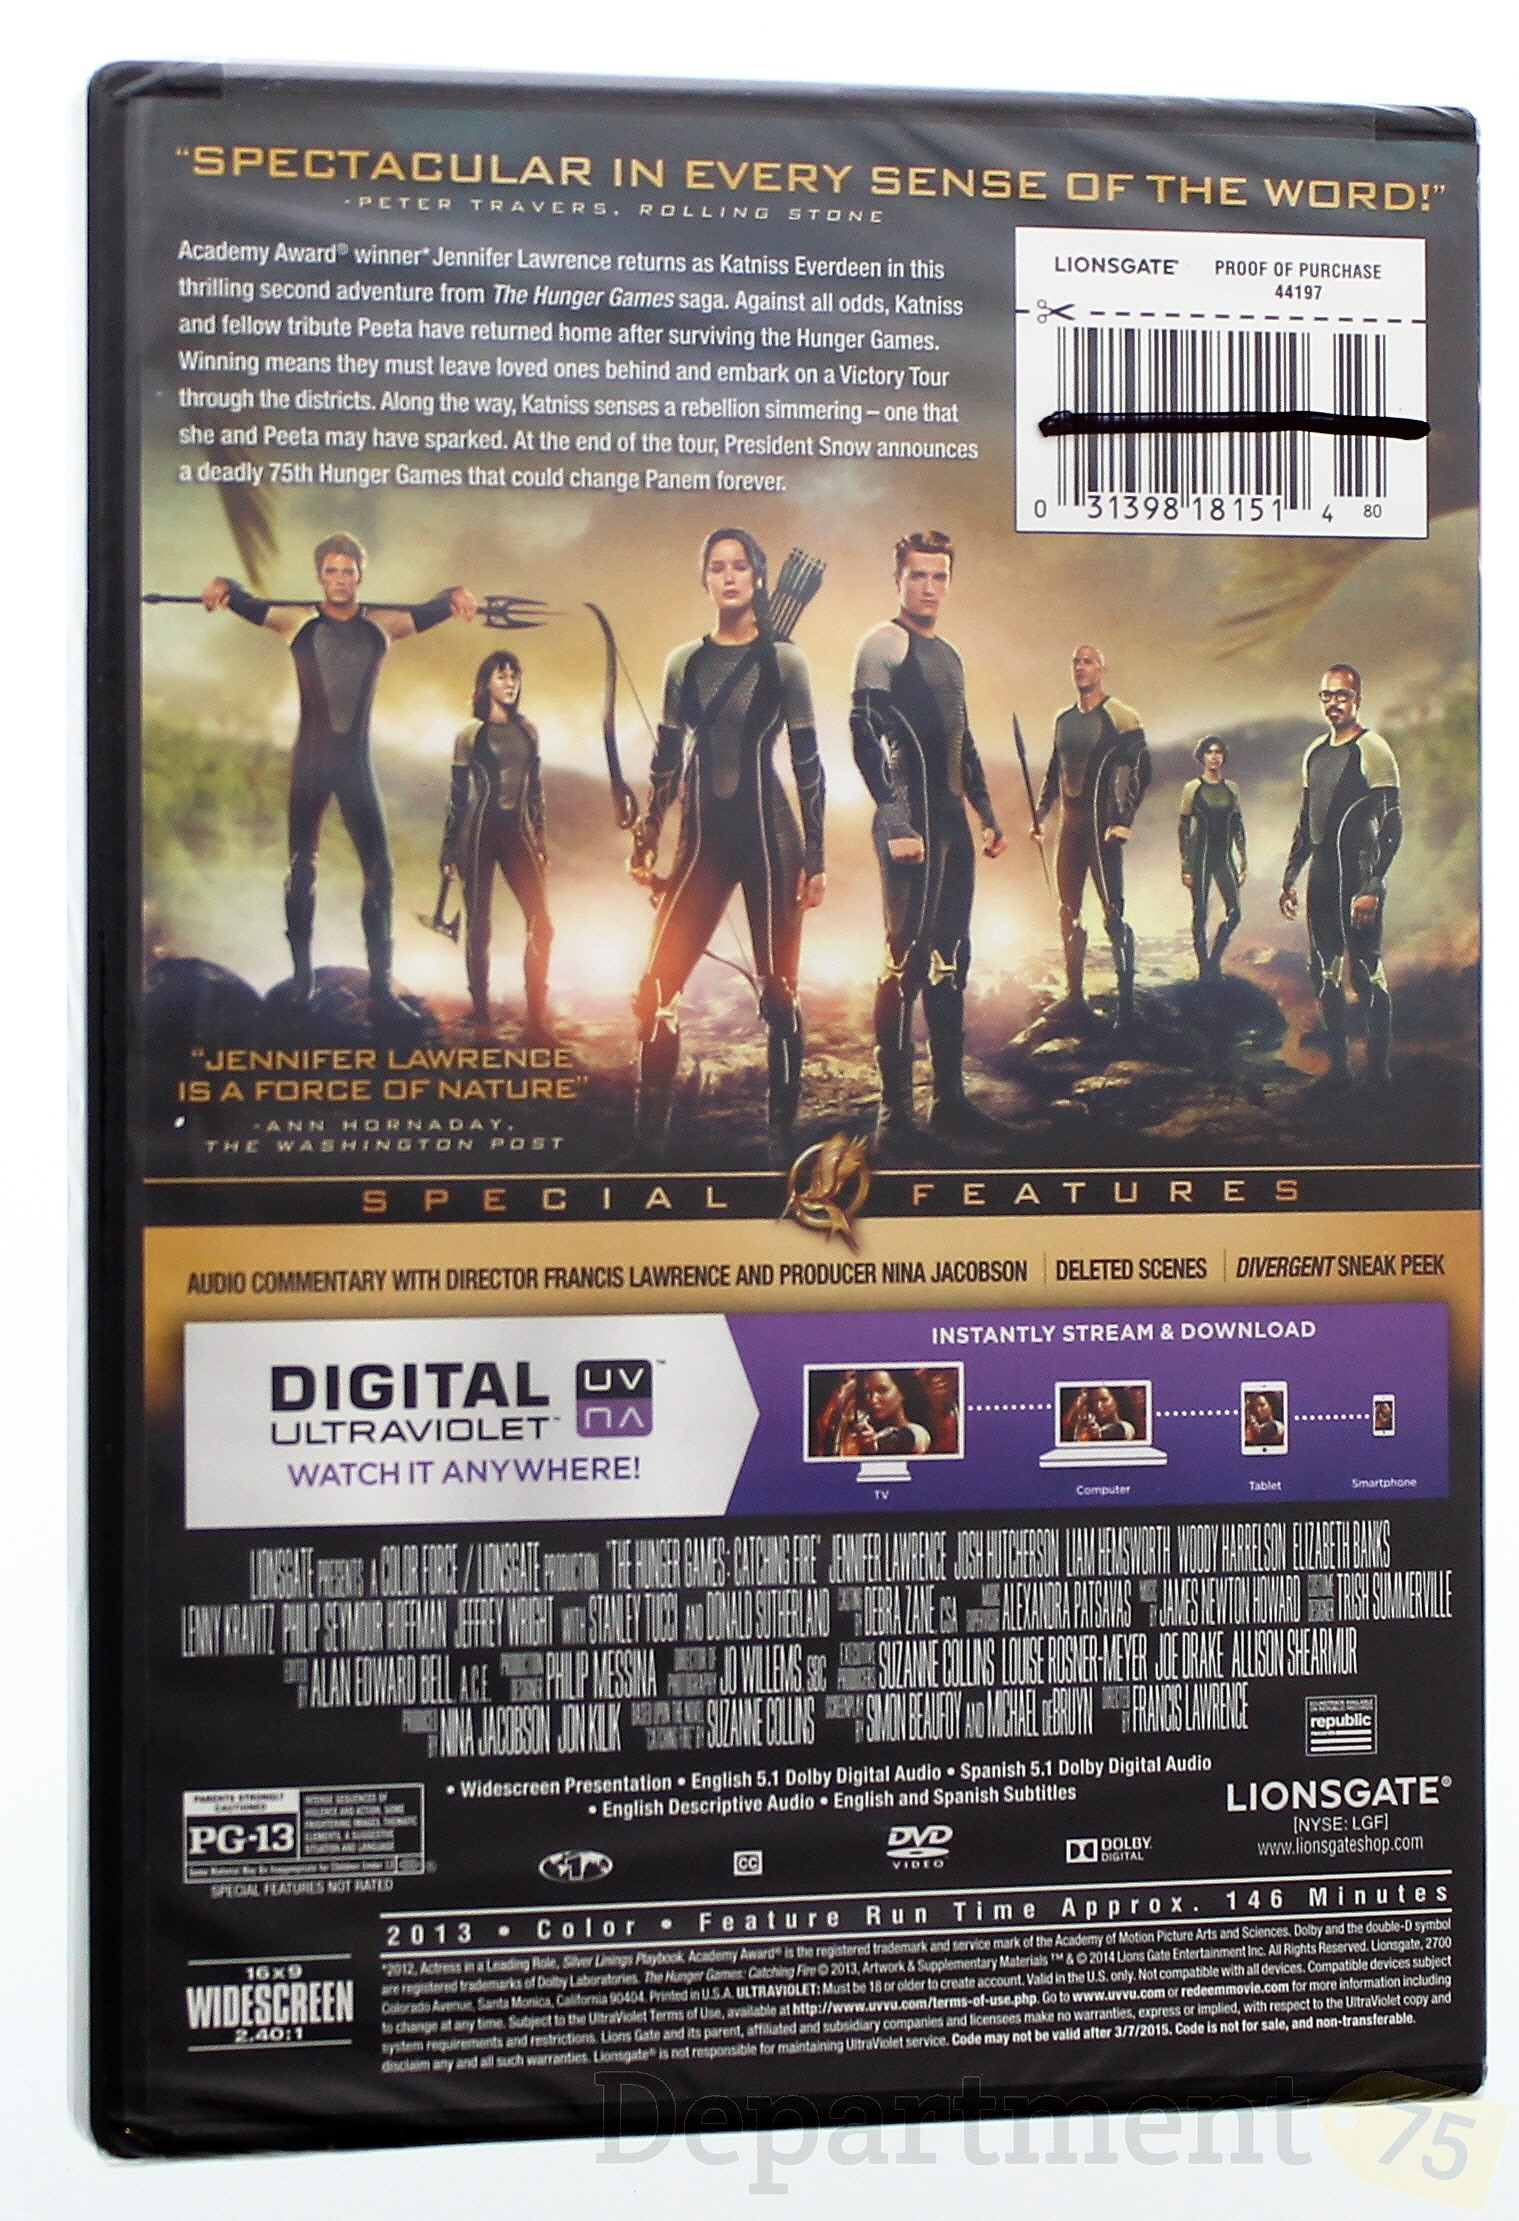 The Hunger Games: Catching Fire (DVD + Digital Copy), Lions Gate, Sci-Fi & Fantasy - image 2 of 2